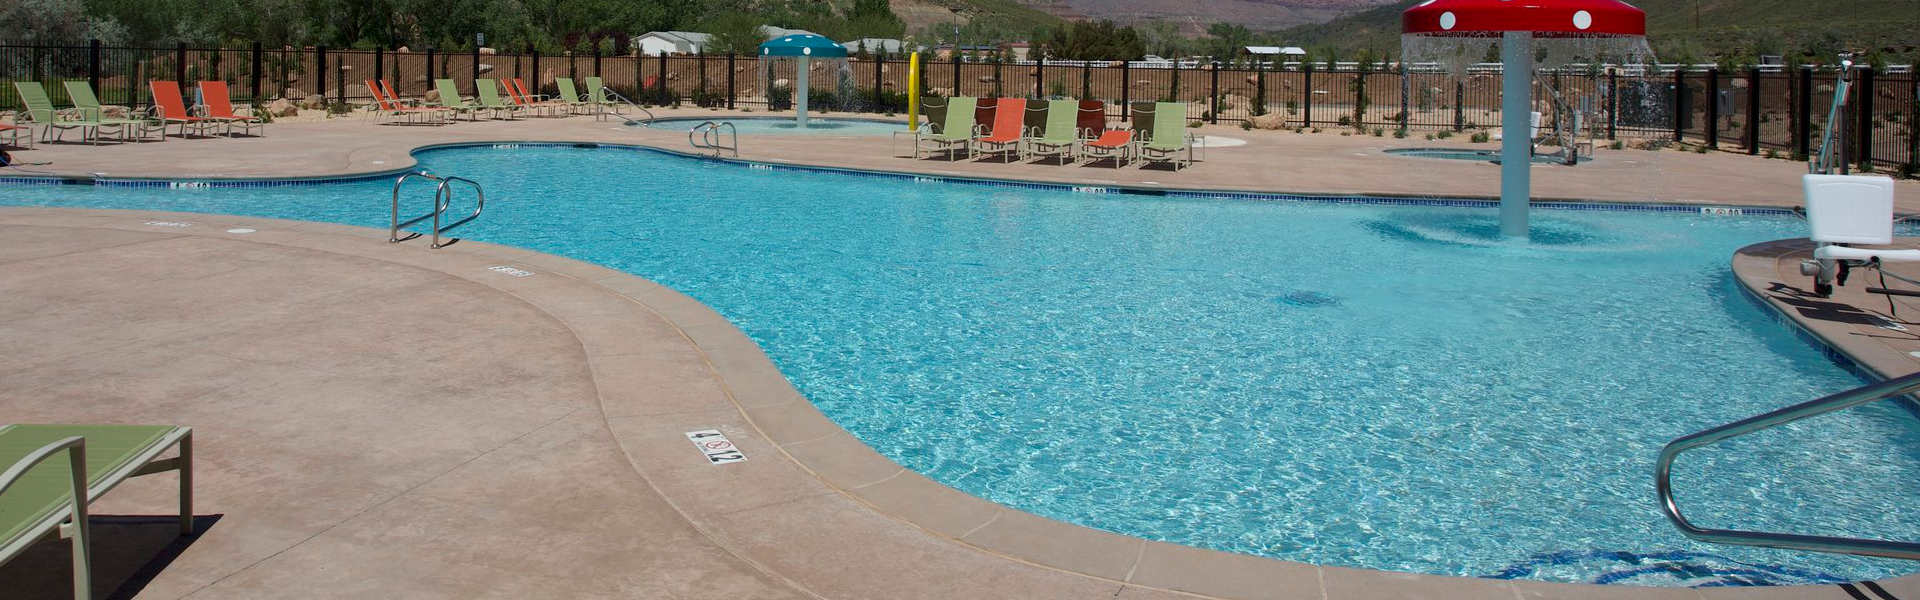 commercial swimming pool at Fairfield Inn and Suites by Marriott in Springdale Utah near Zion National Park